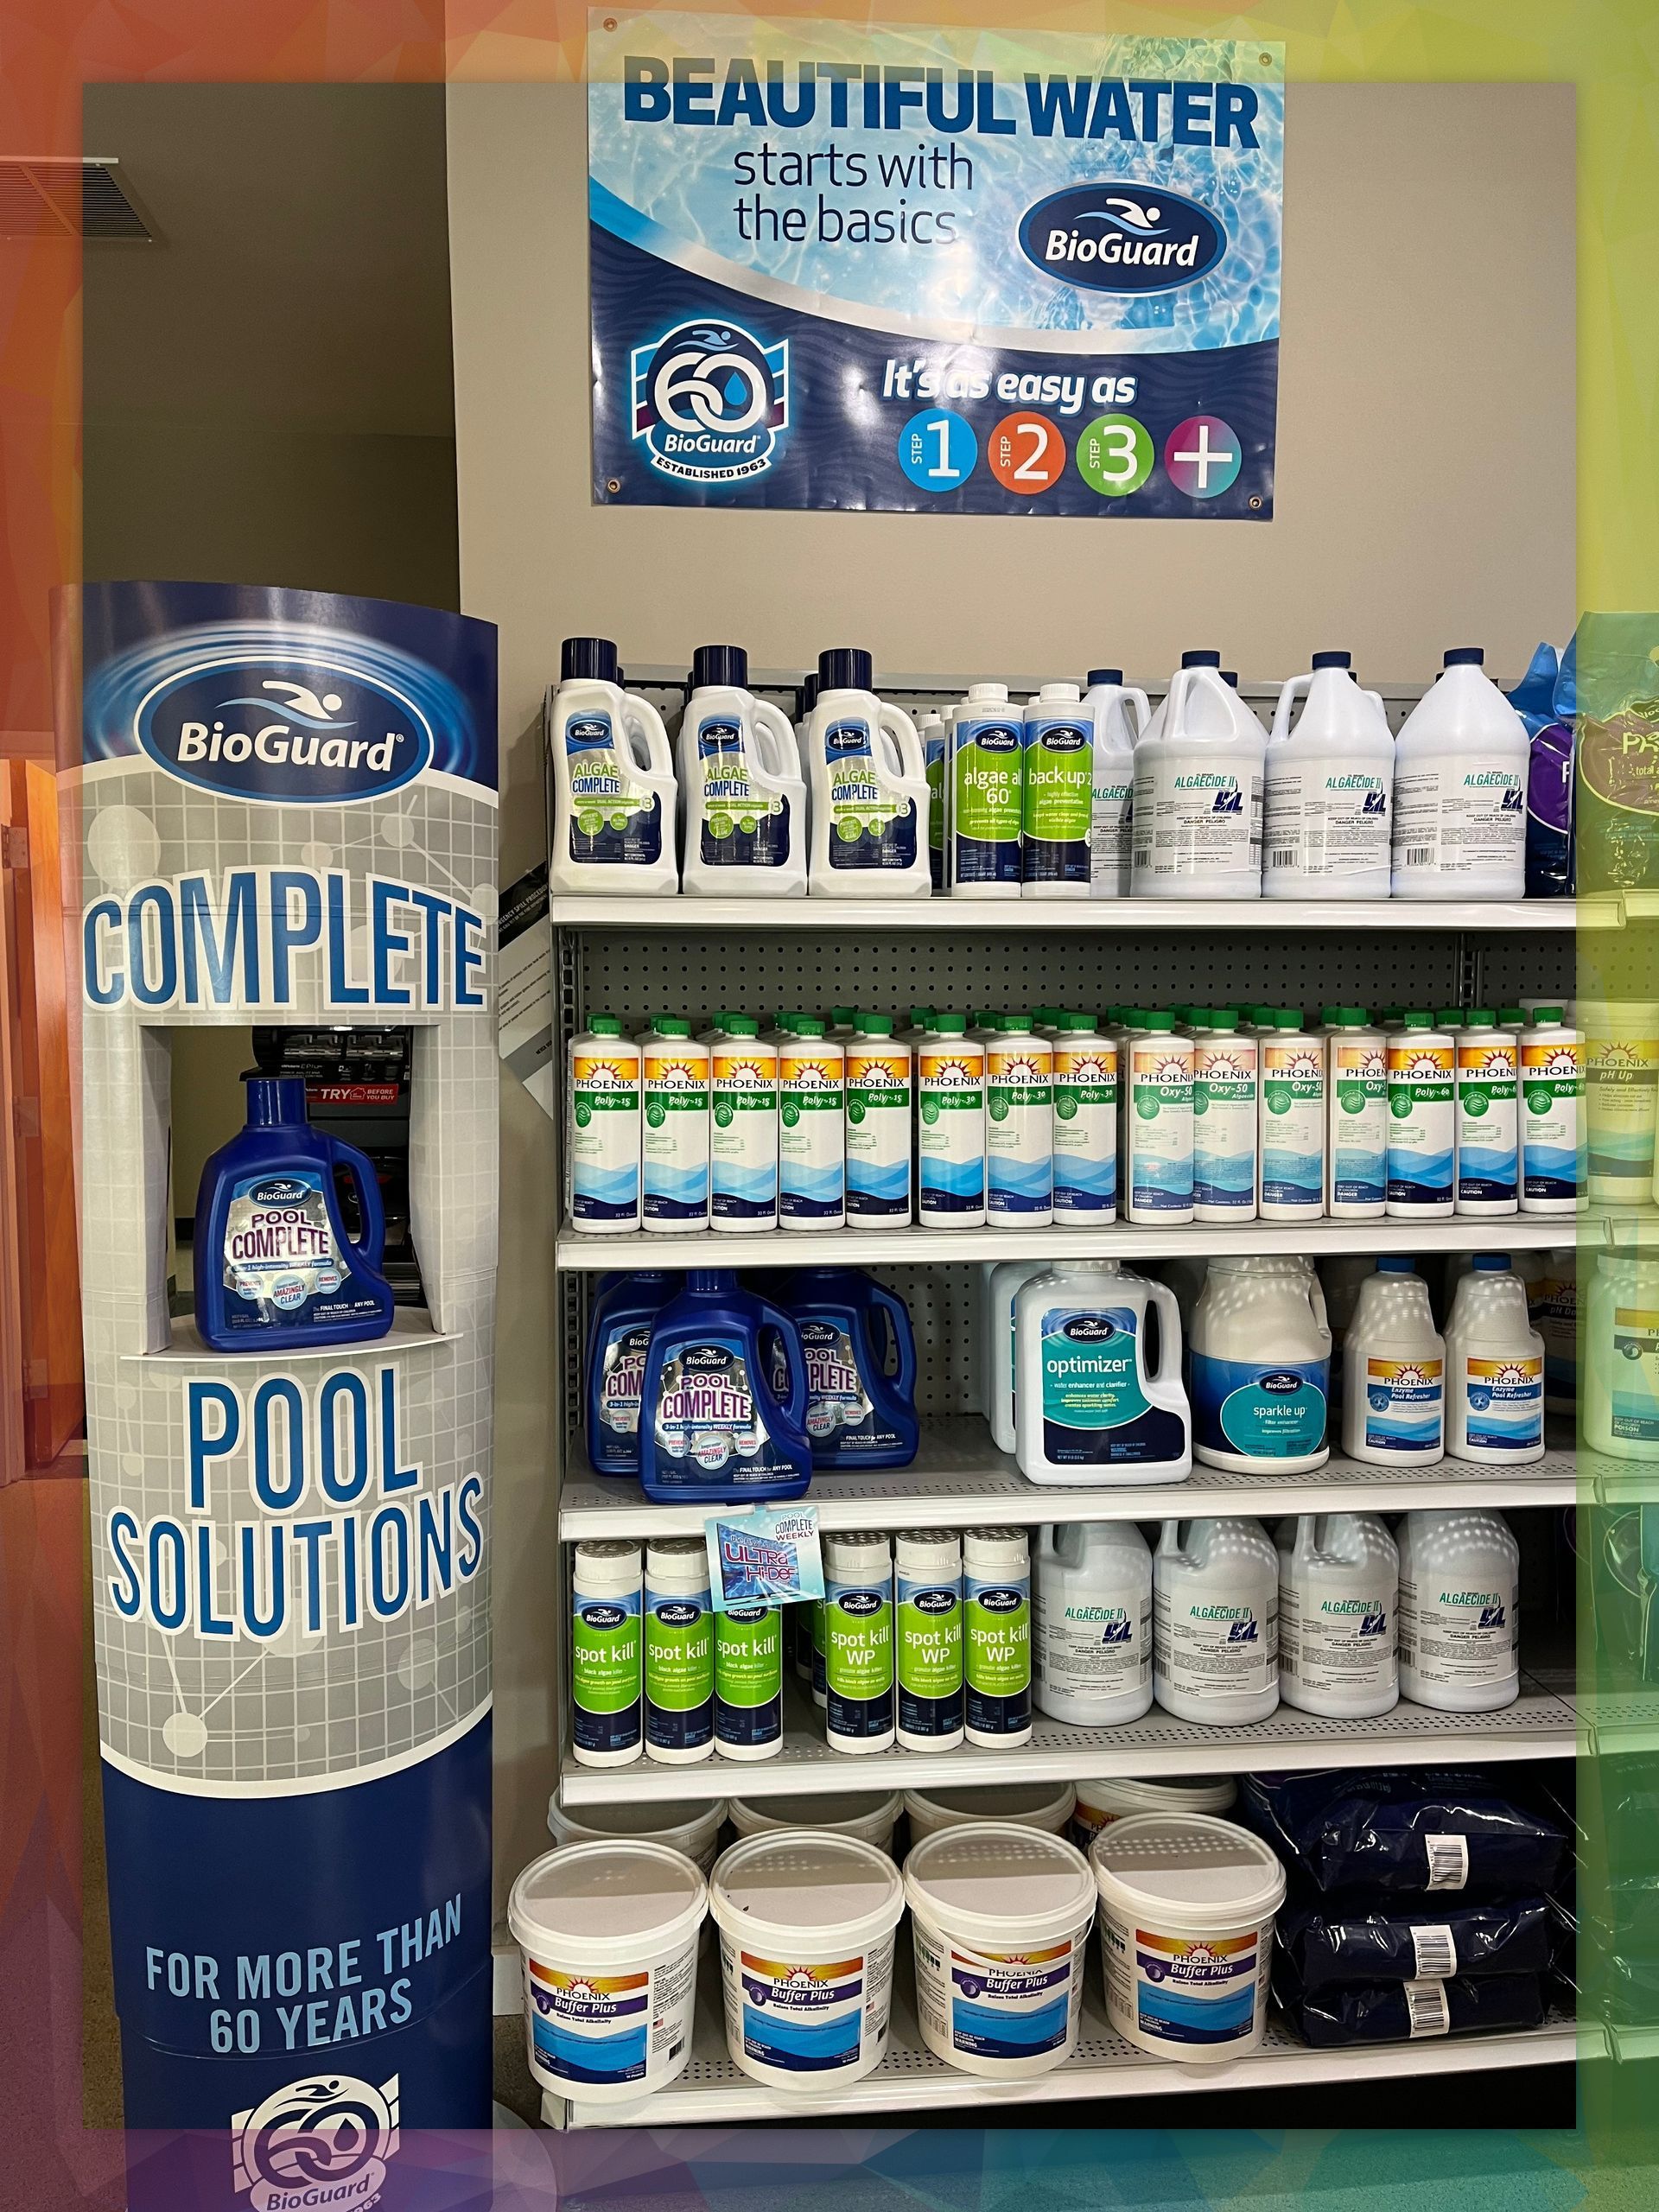 A display of pool supplies in a store with a sign that says `` beautiful water ''.